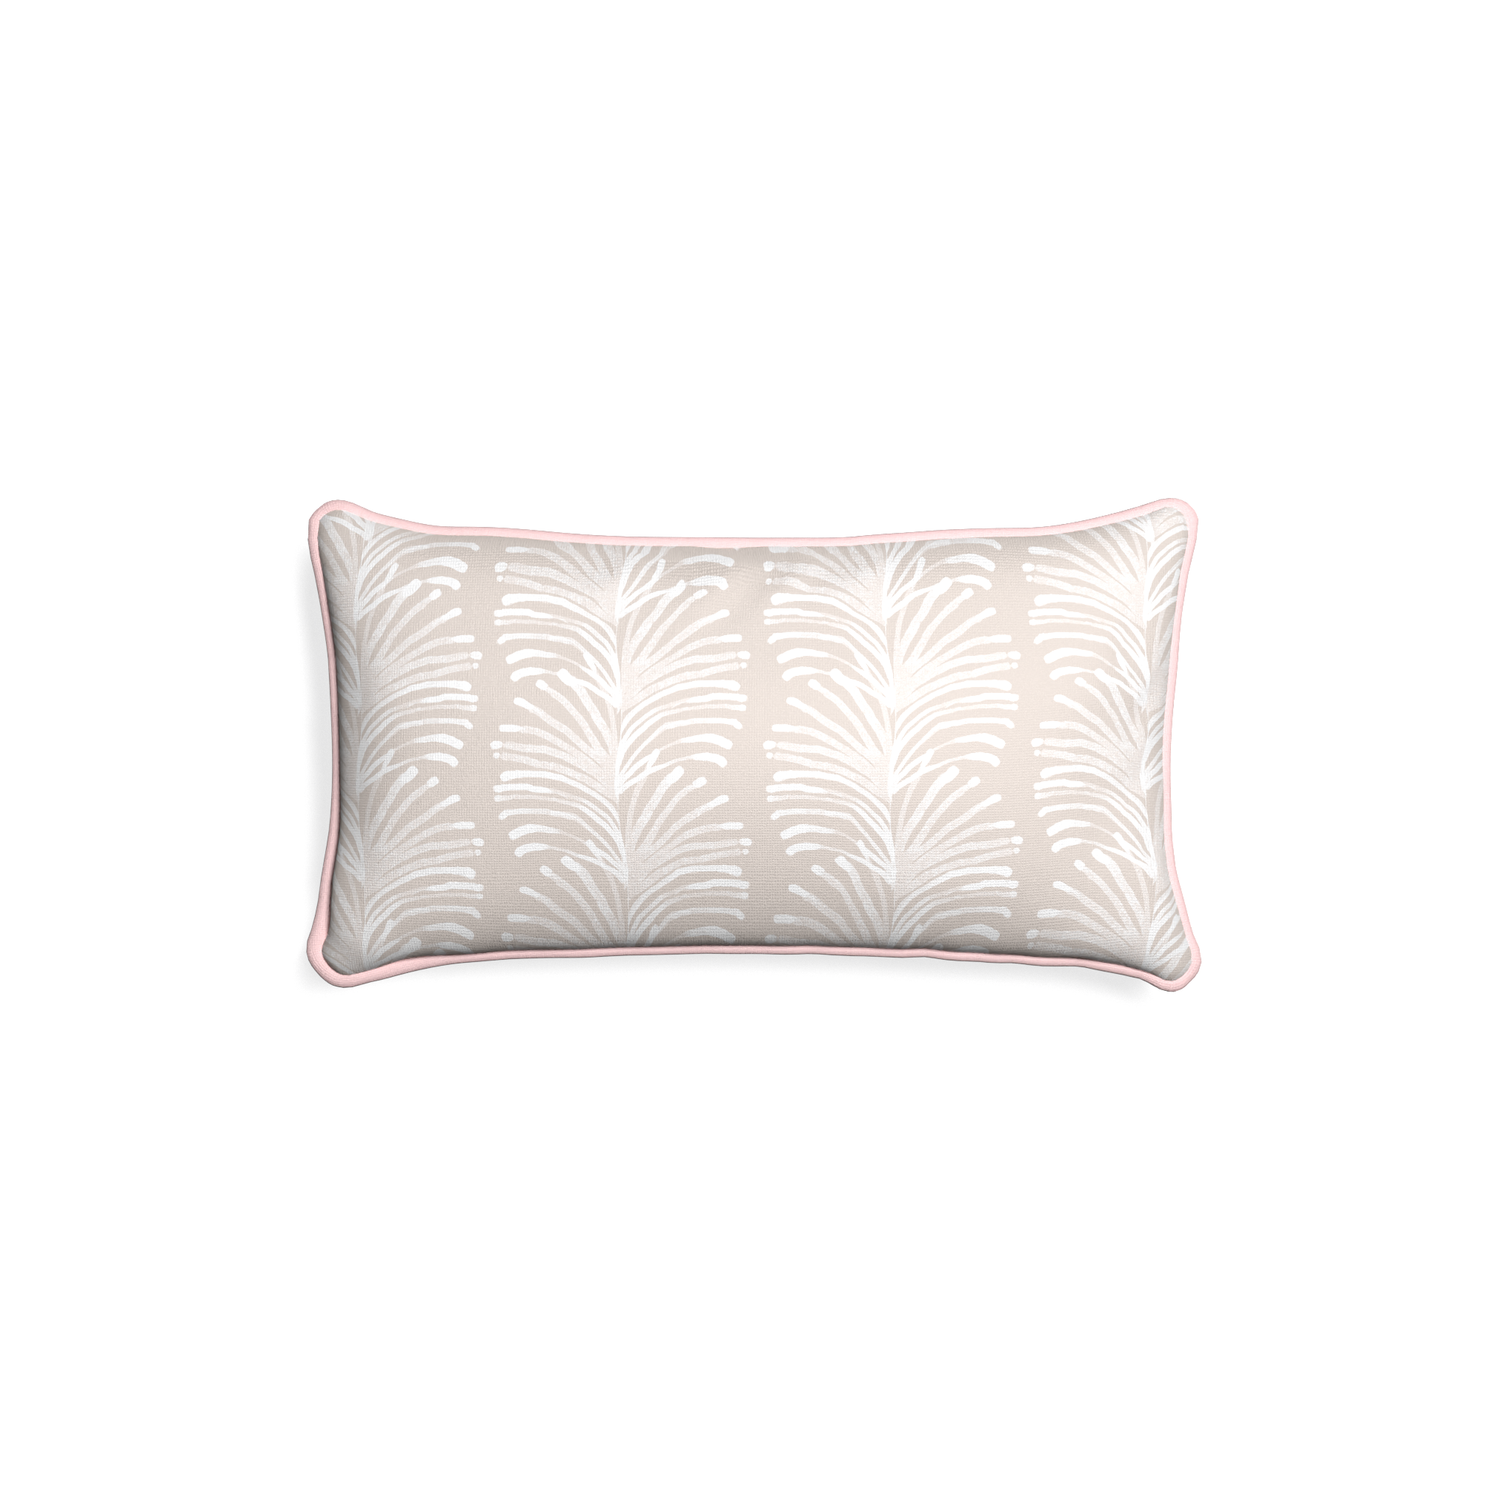 Petite-lumbar emma sand custom sand colored botanical stripepillow with petal piping on white background